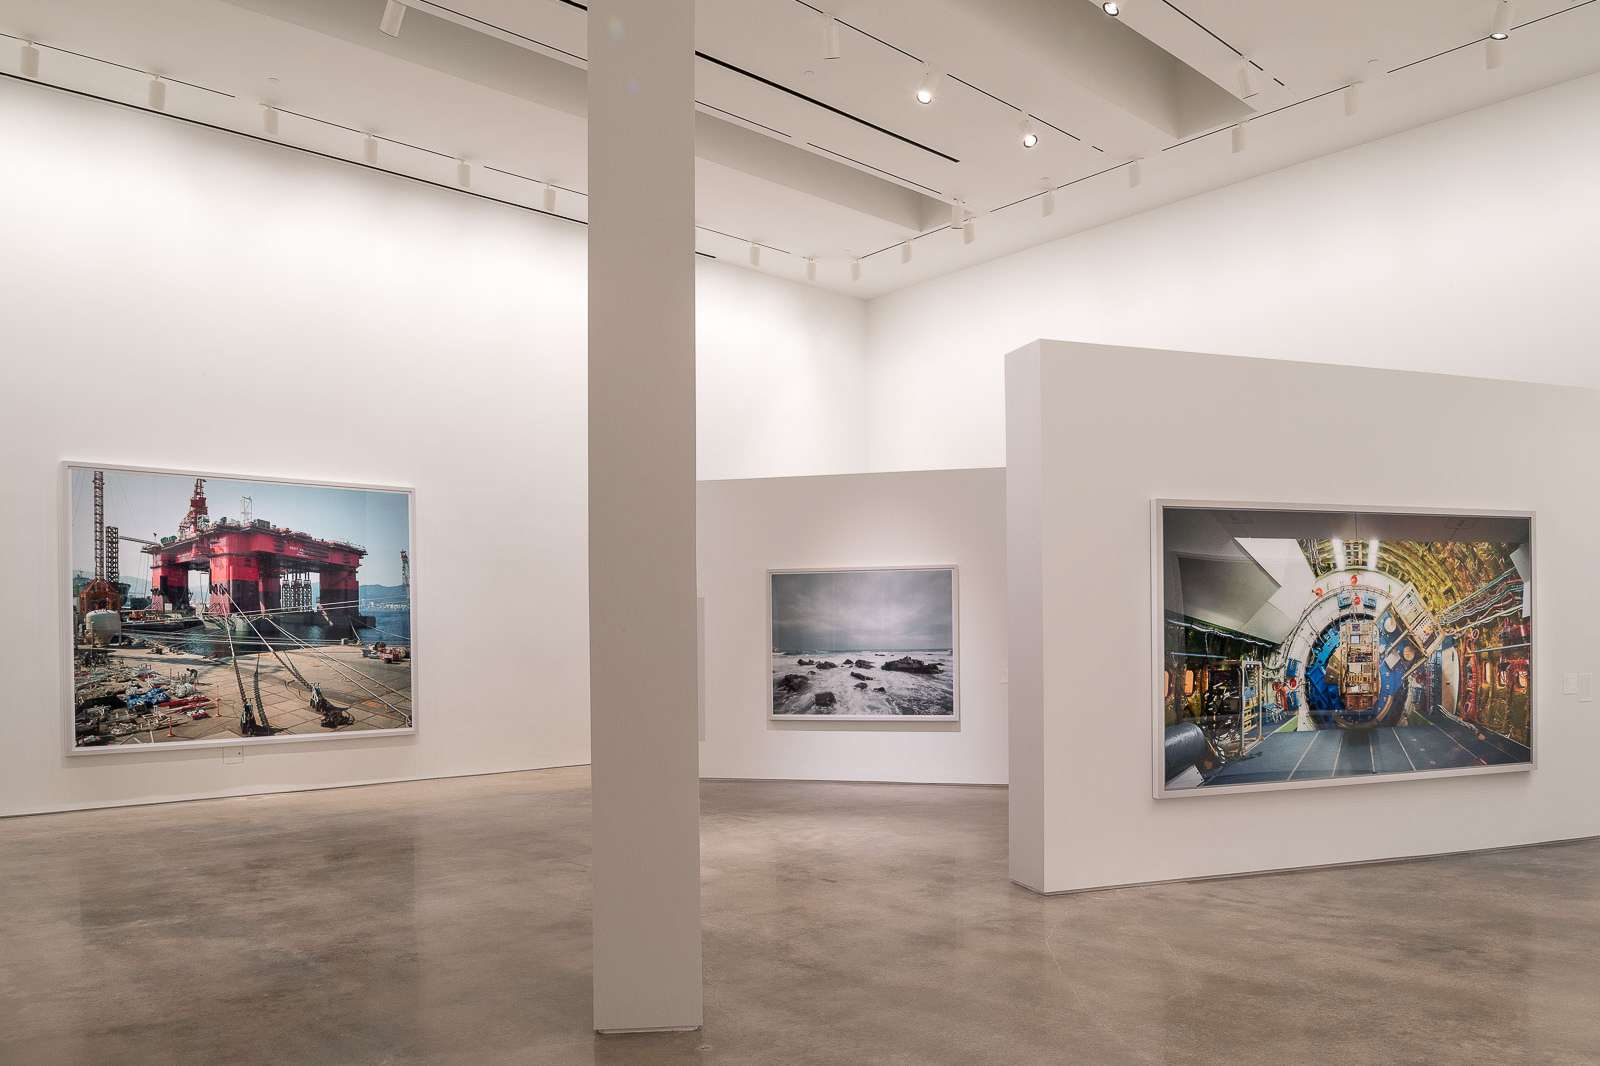 dInstallation view of Thomas Struth: Nature & Politics at the Moody Center for the Arts. ©Thomas Struth. Photo: Nash Baker